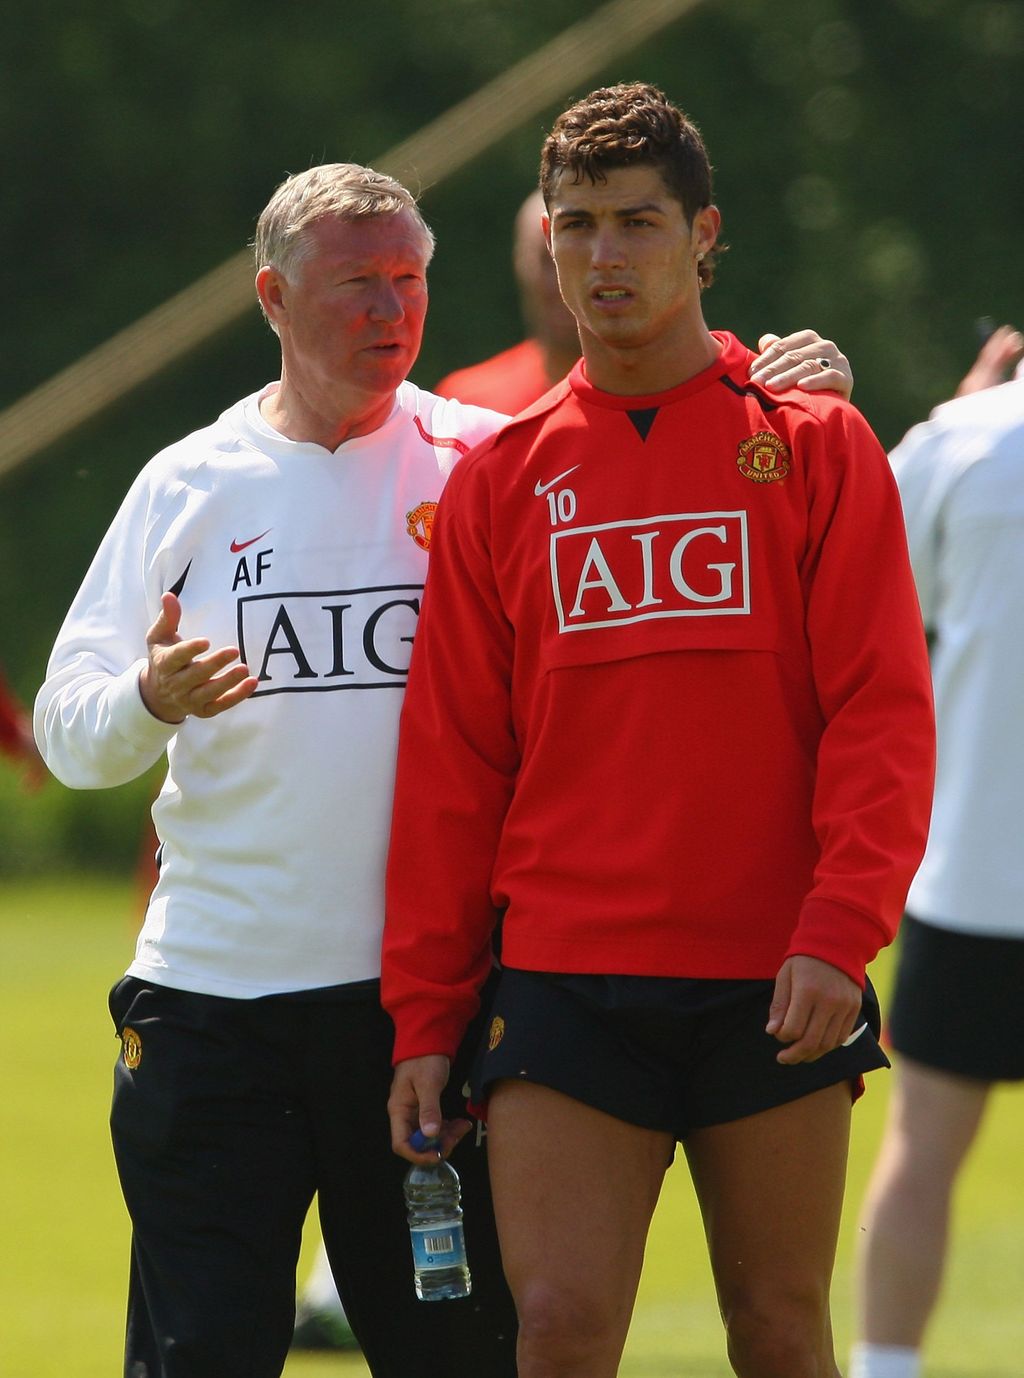 MANCHESTER, UNITED KINGDOM - MAY 15:  Sir Alex Ferguson the manager of Manchester United talks with Cristiano Ronaldo ahead of the UEFA Champions League Final during the Manchester United media day held at the Carrington Training Complex on May 15, 2008 in Manchester, England.  (Photo by Alex Livesey/Getty Images)